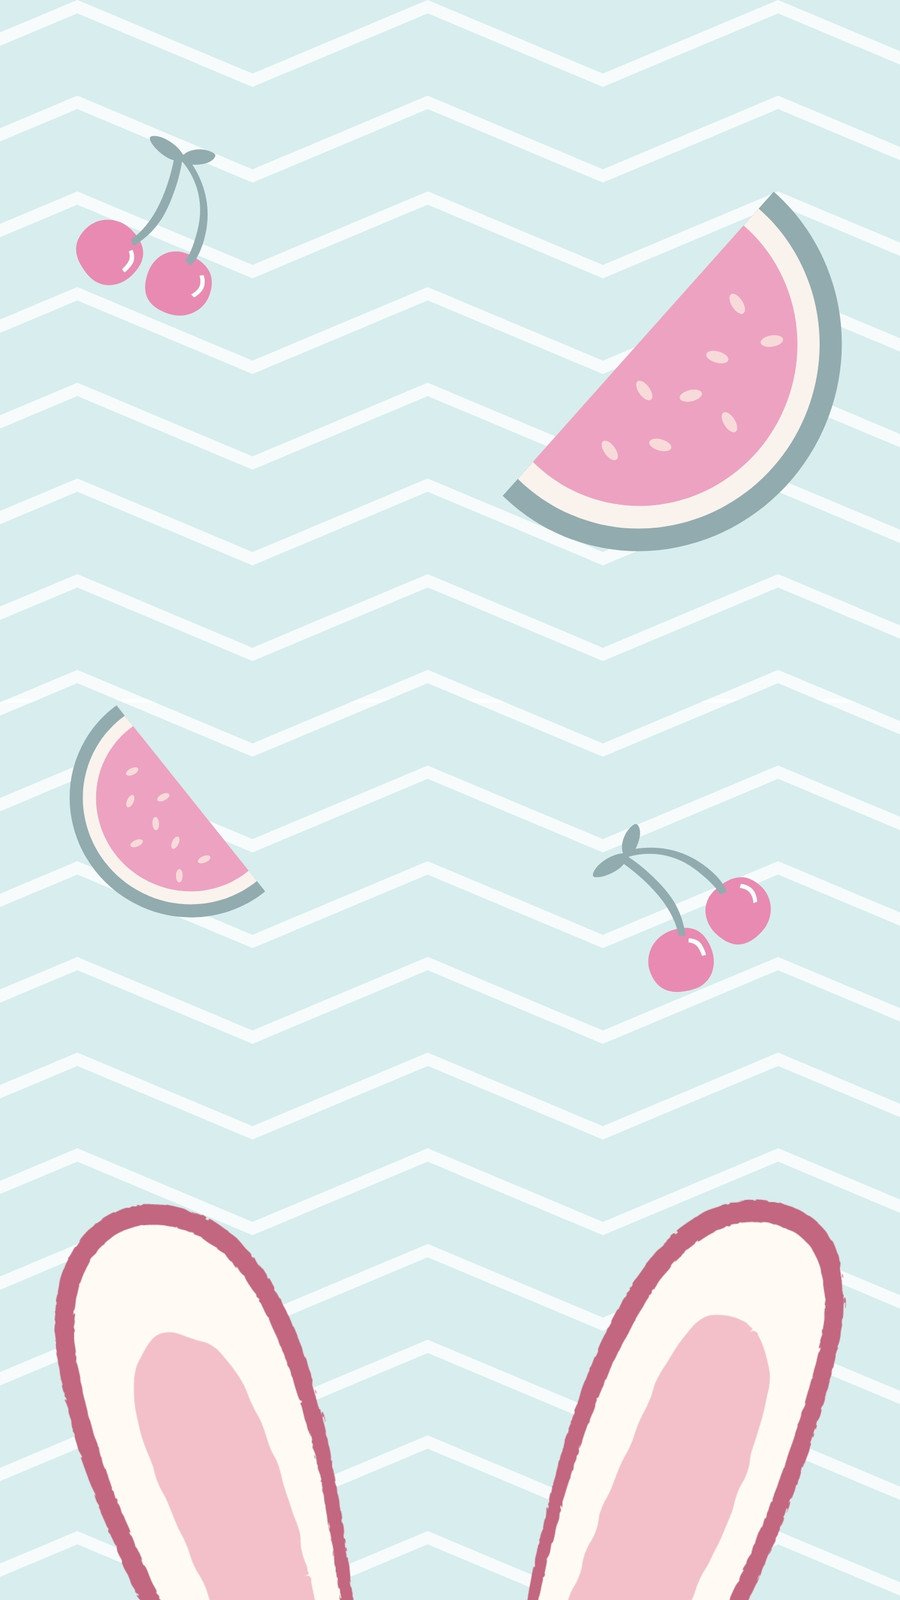 Page 2 - Free and customizable cute pink wallpaper templates